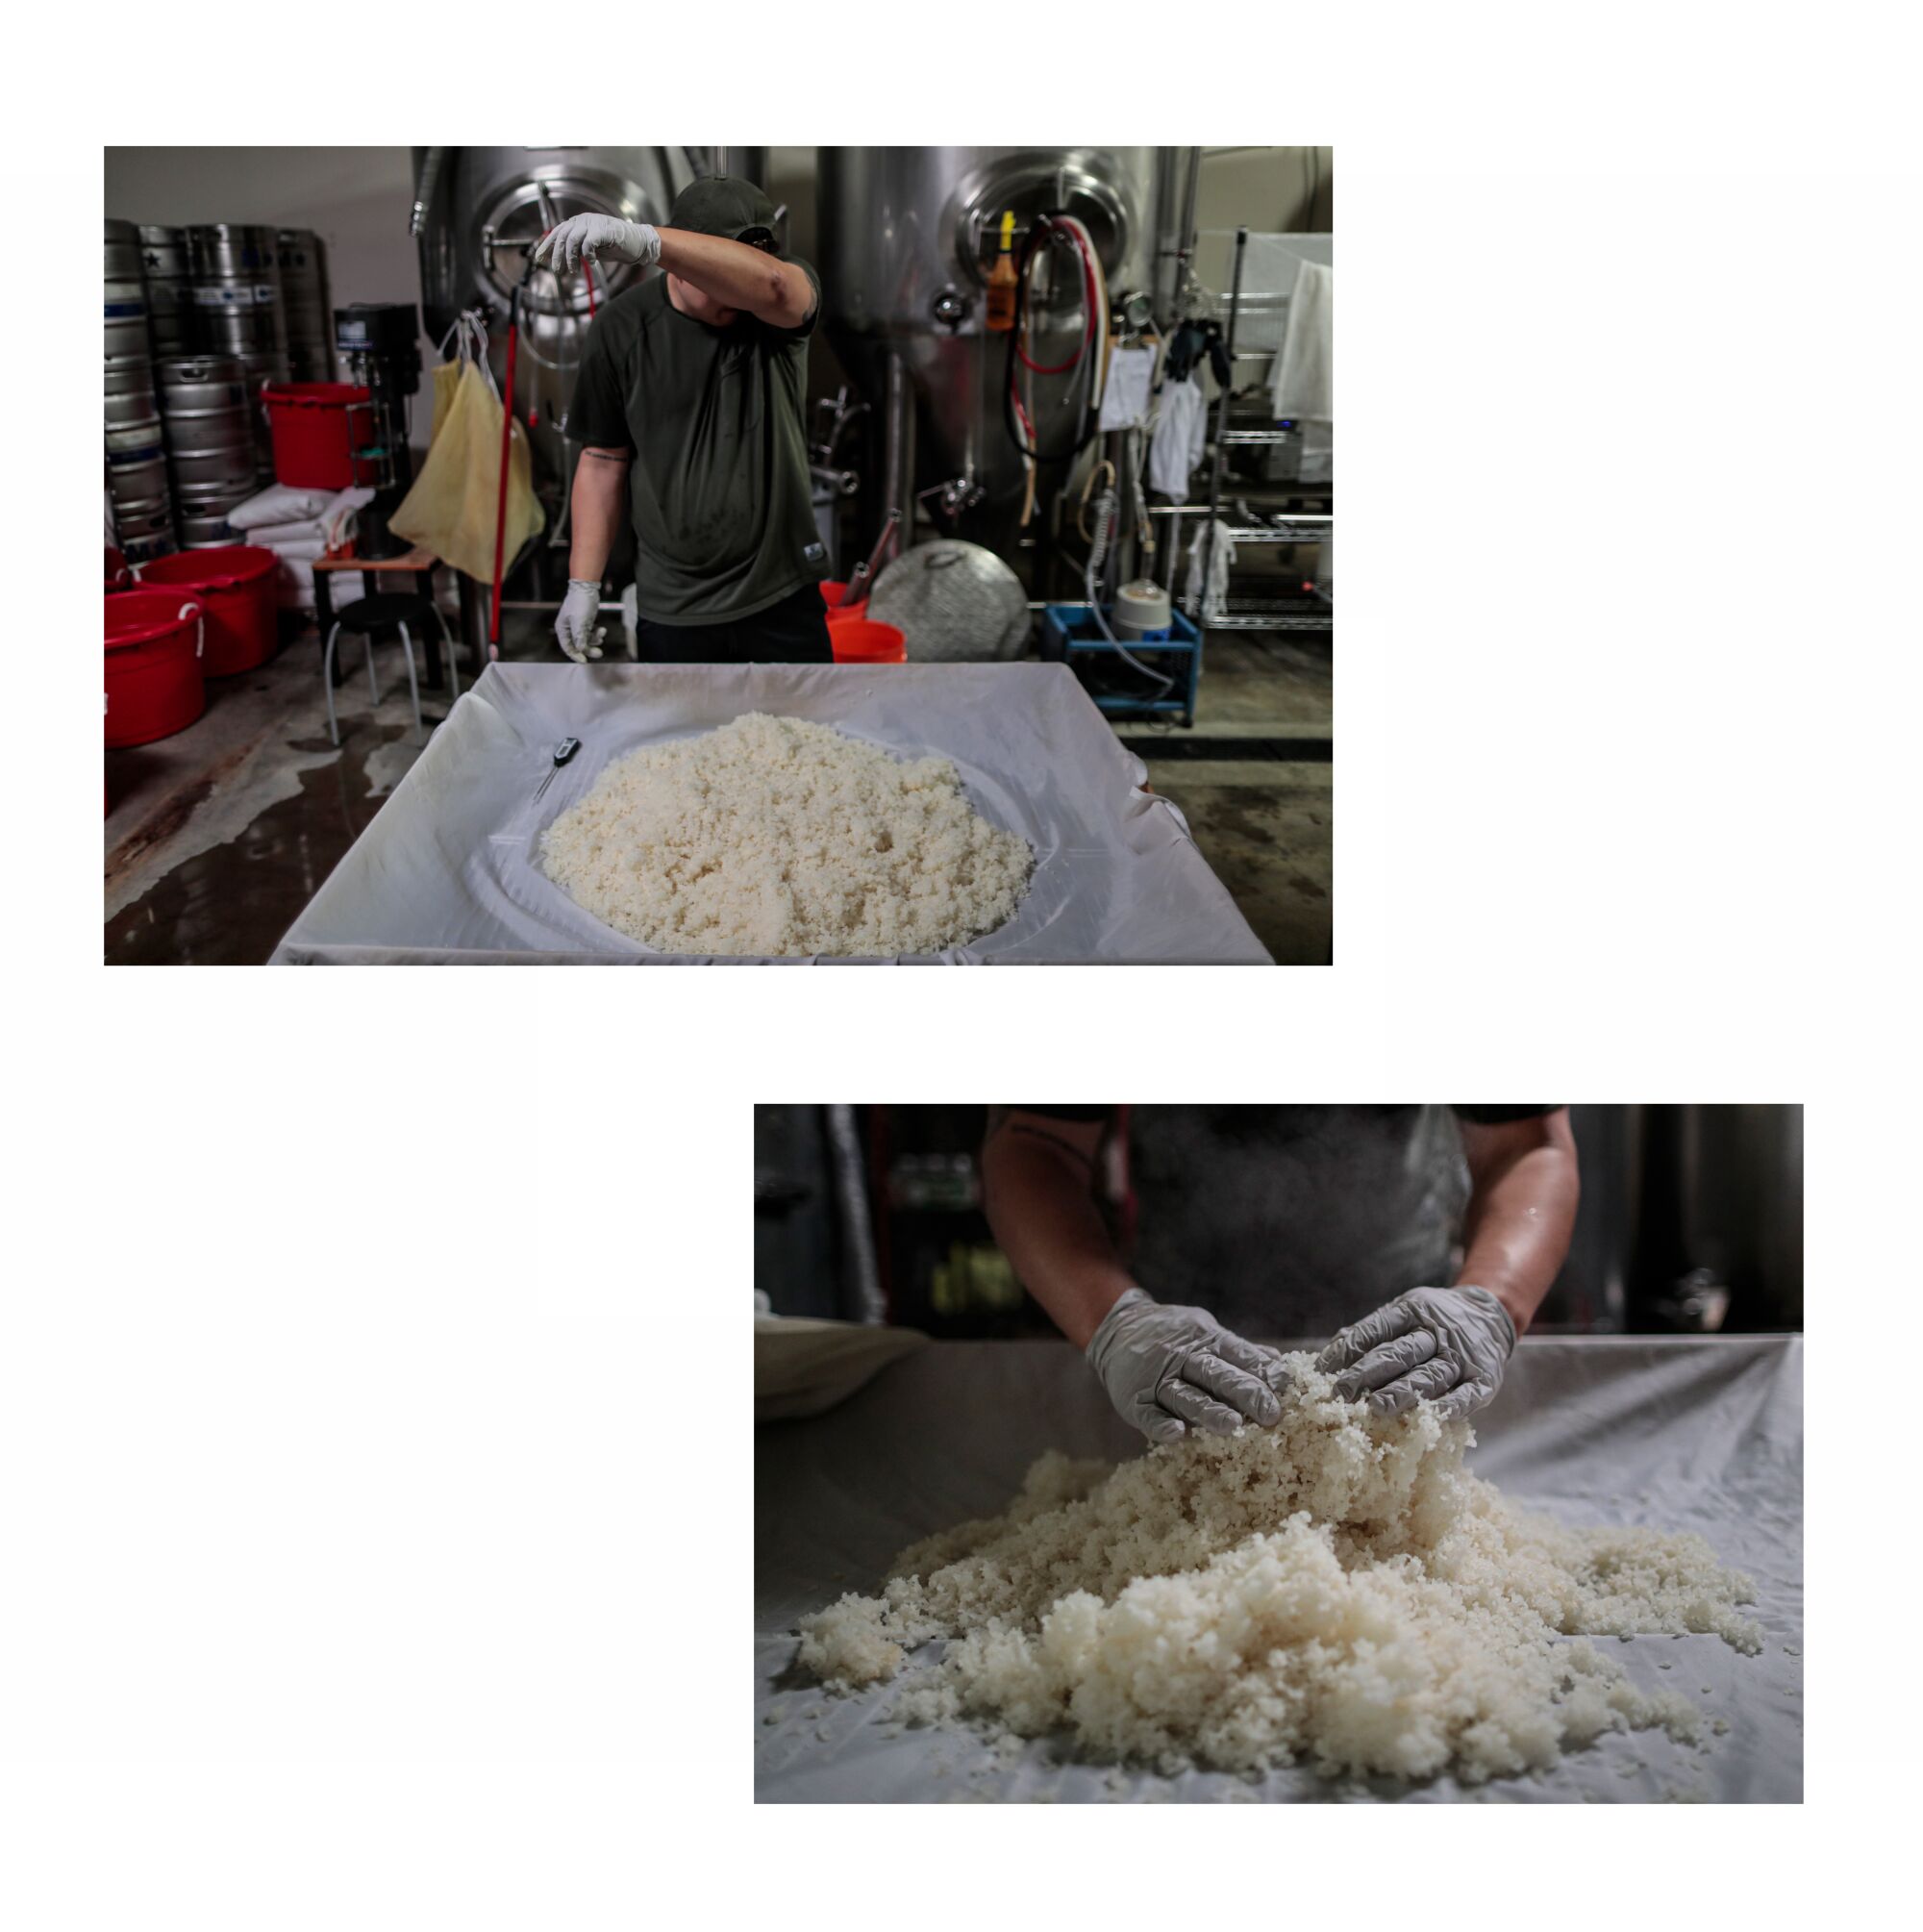 Top: A man wipes sweat from his forehead as he stands behind a table with a giant pile of rice
Bottom: hands handle rice